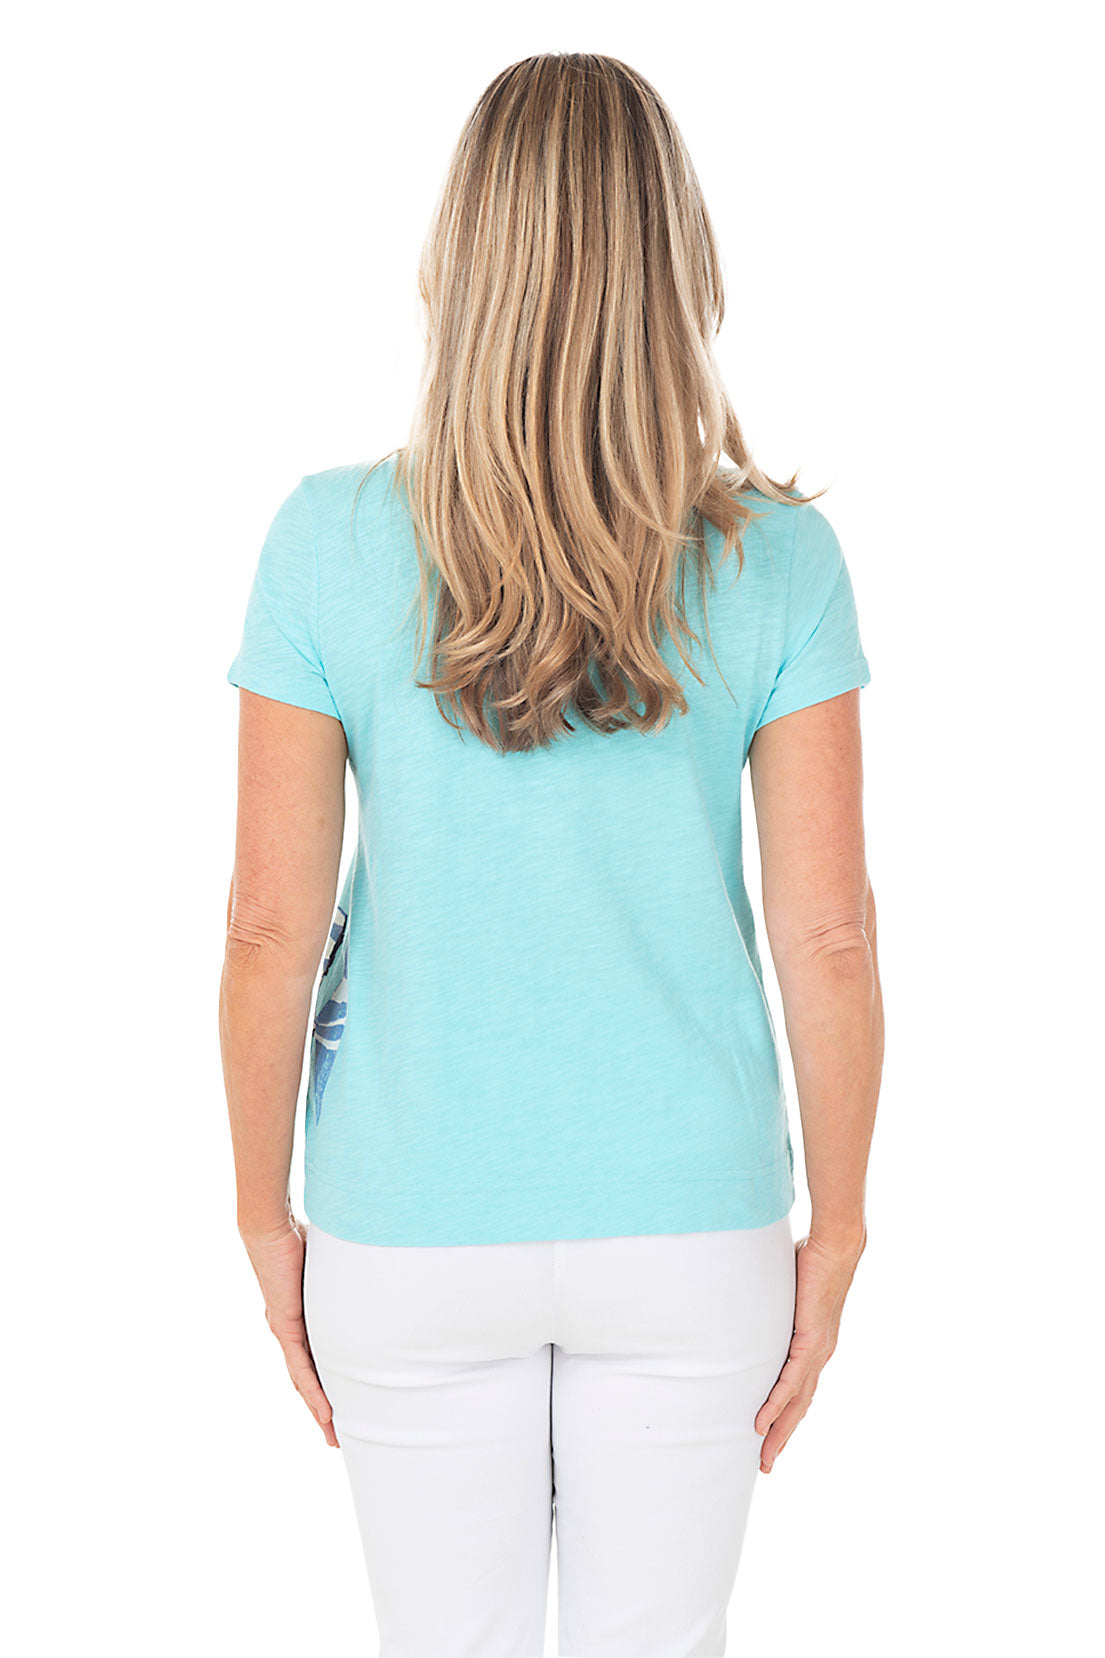 Turquoise Striped Fish V-Neck Tee